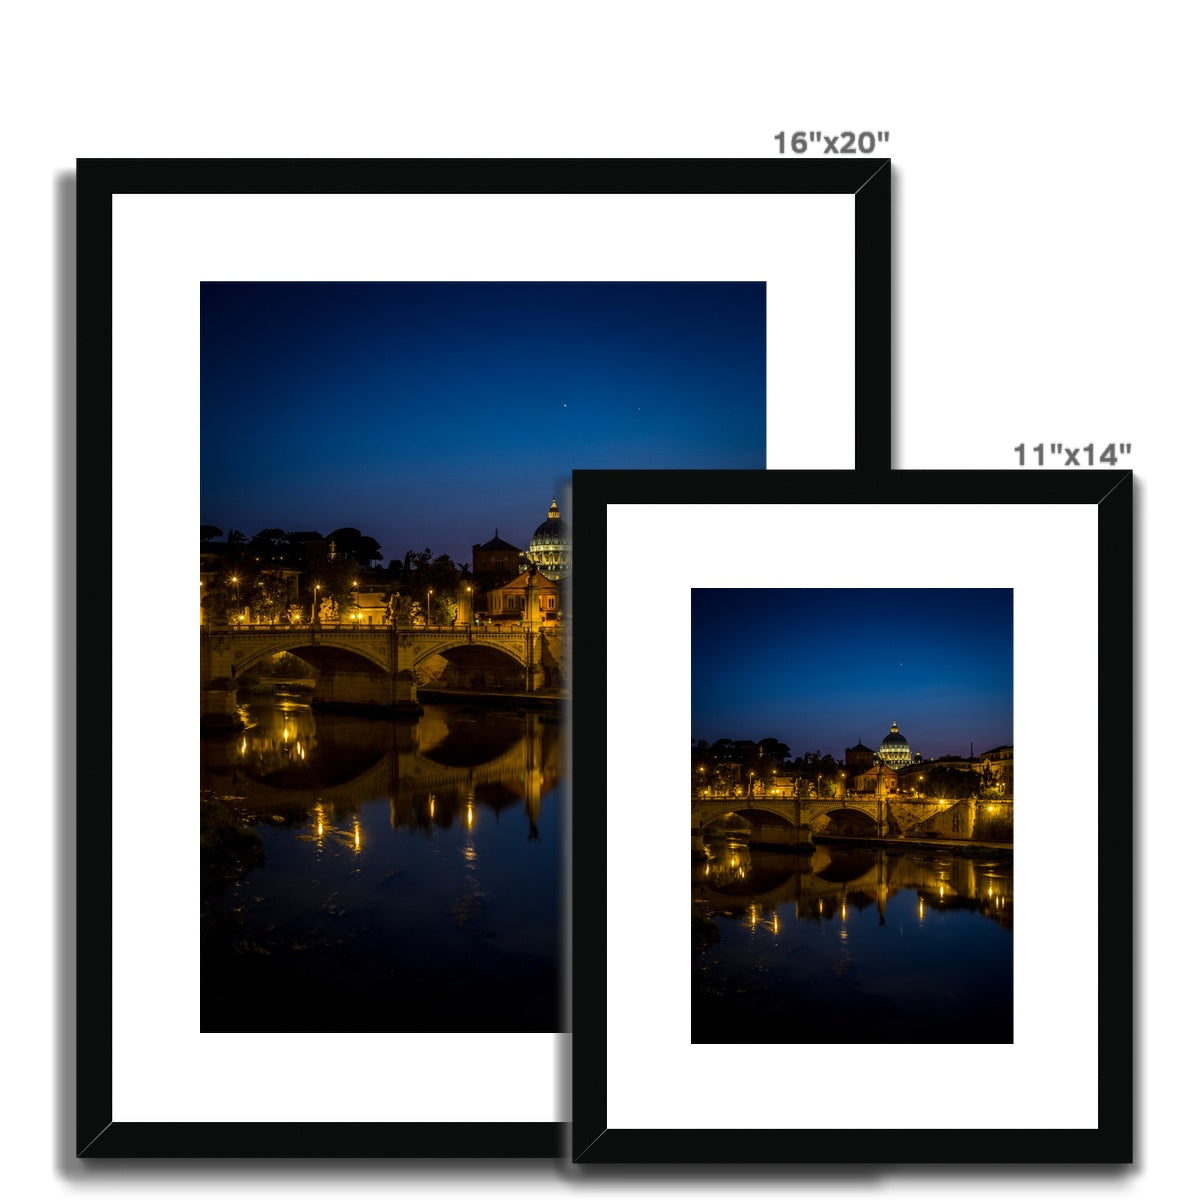 St Peter's Basilica. Ponte Vittorio Emanuele ll Vatican City at night, Rome, Italy. Framed & Mounted Print